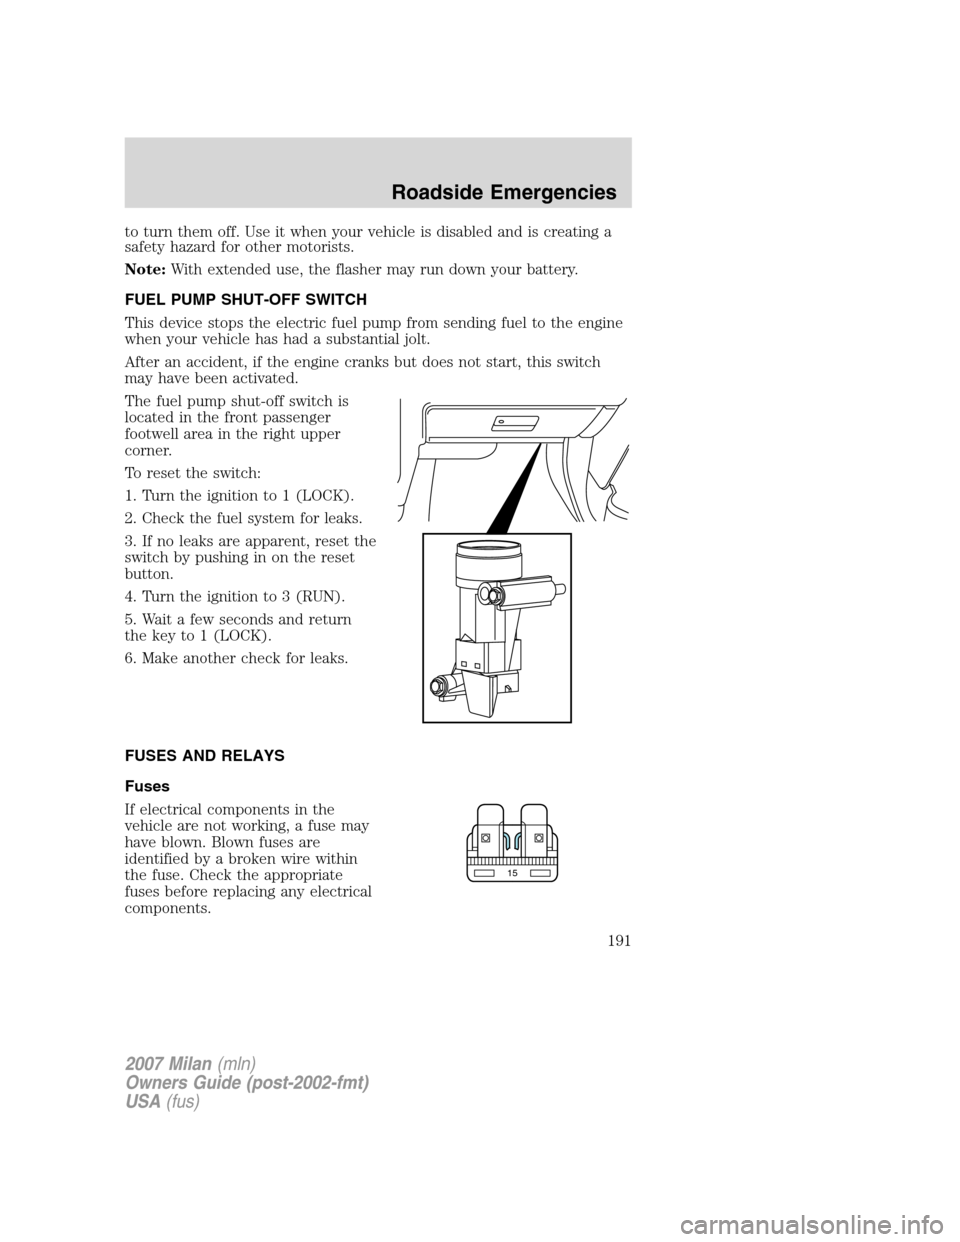 Mercury Milan 2007  Owners Manuals to turn them off. Use it when your vehicle is disabled and is creating a
safety hazard for other motorists.
Note:With extended use, the flasher may run down your battery.
FUEL PUMP SHUT-OFF SWITCH
Thi